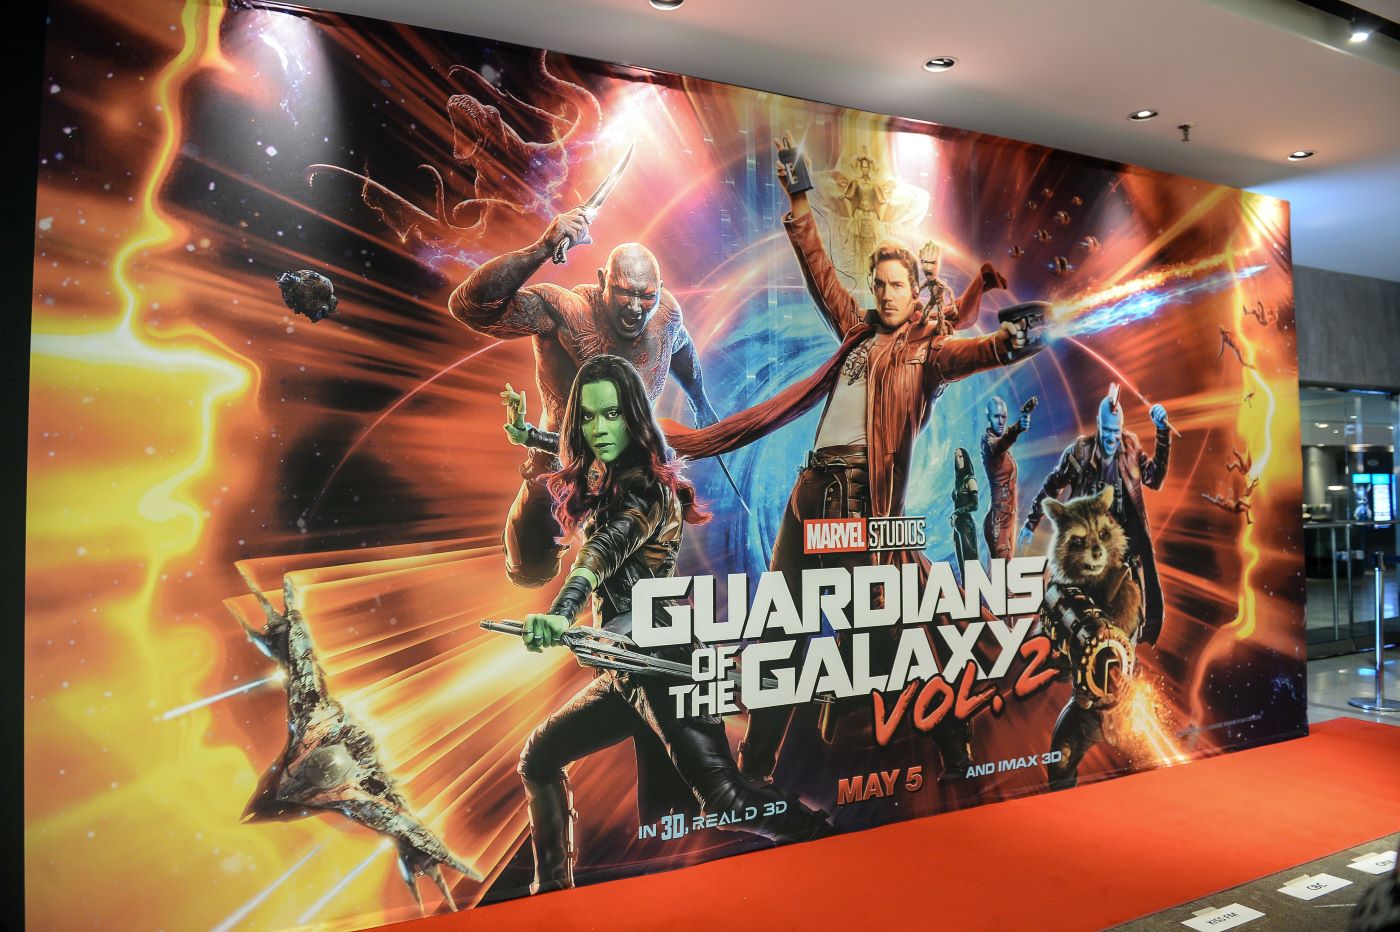 A Guardians of the Galaxy poster with all the main characters, including Rocket, in a collage style.